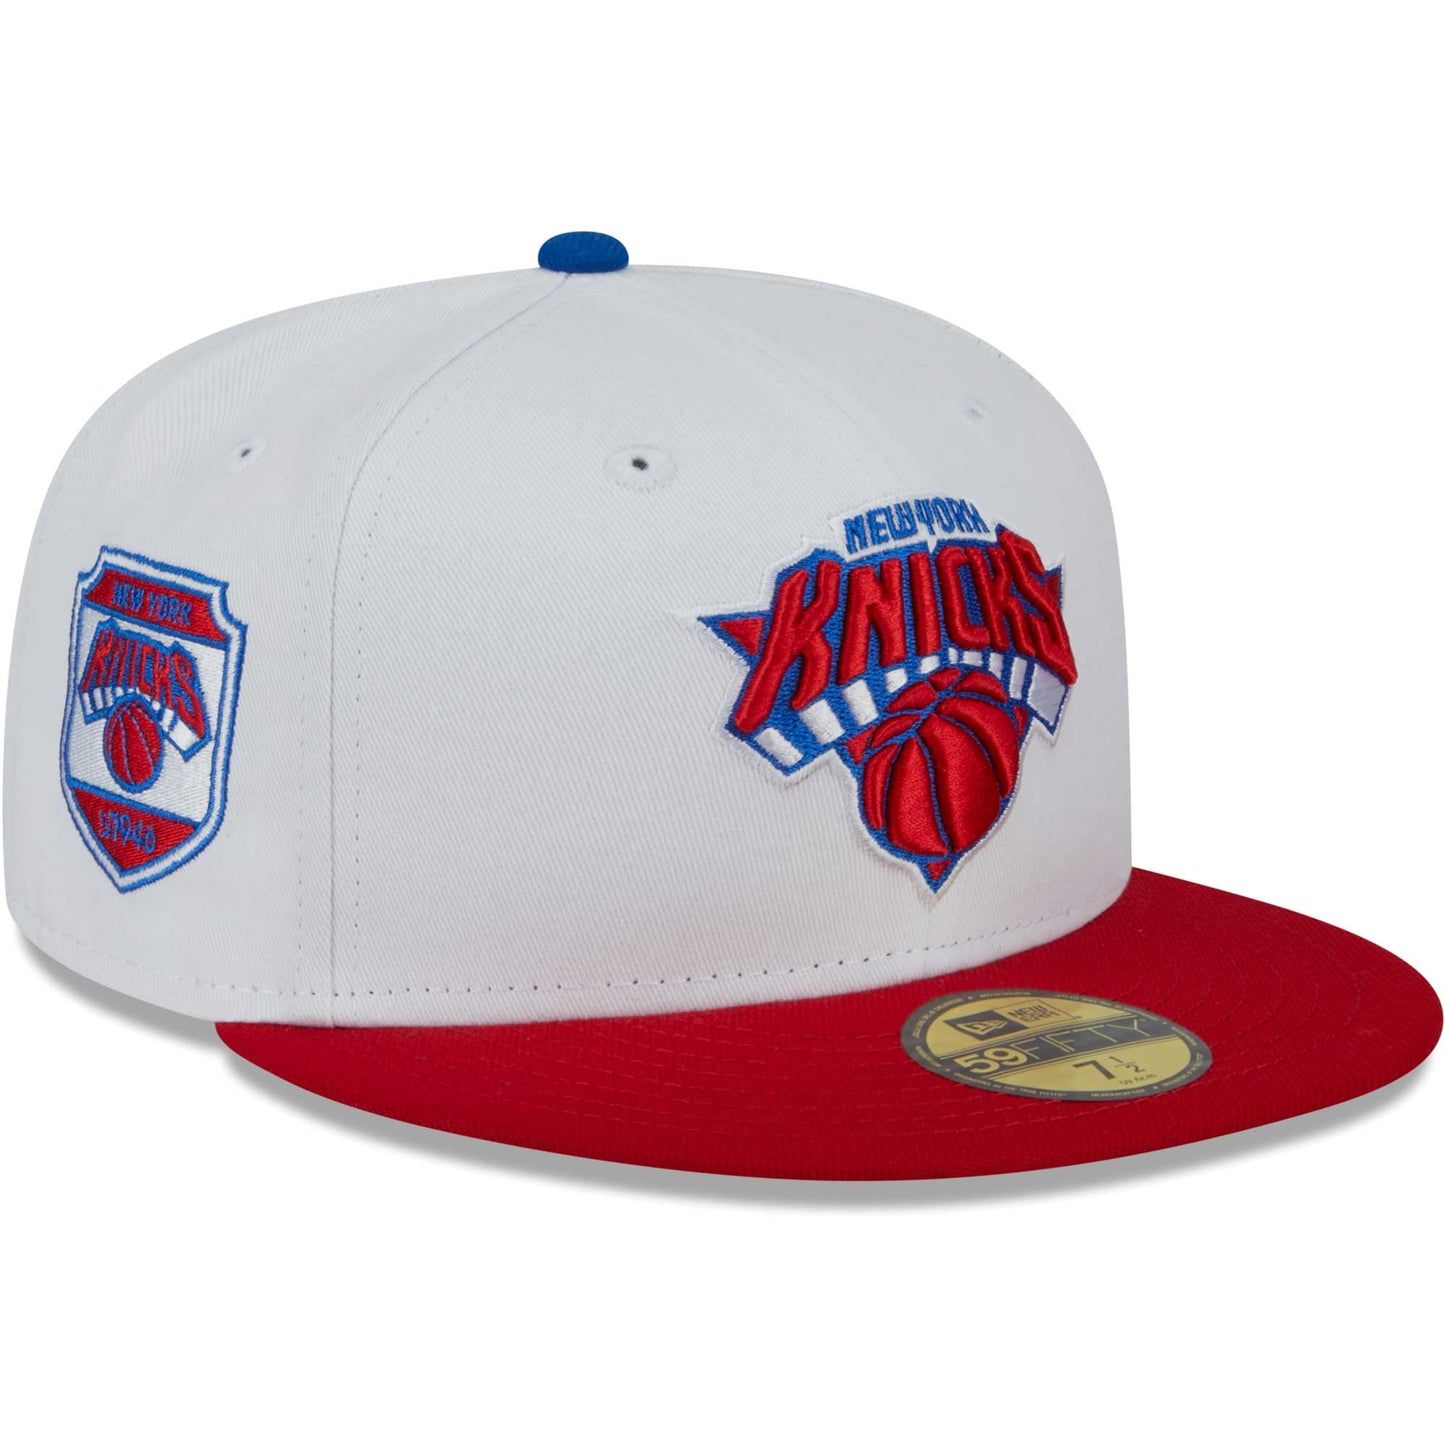 New York Knicks New Era 59FIFTY Fitted Hat - White/Red